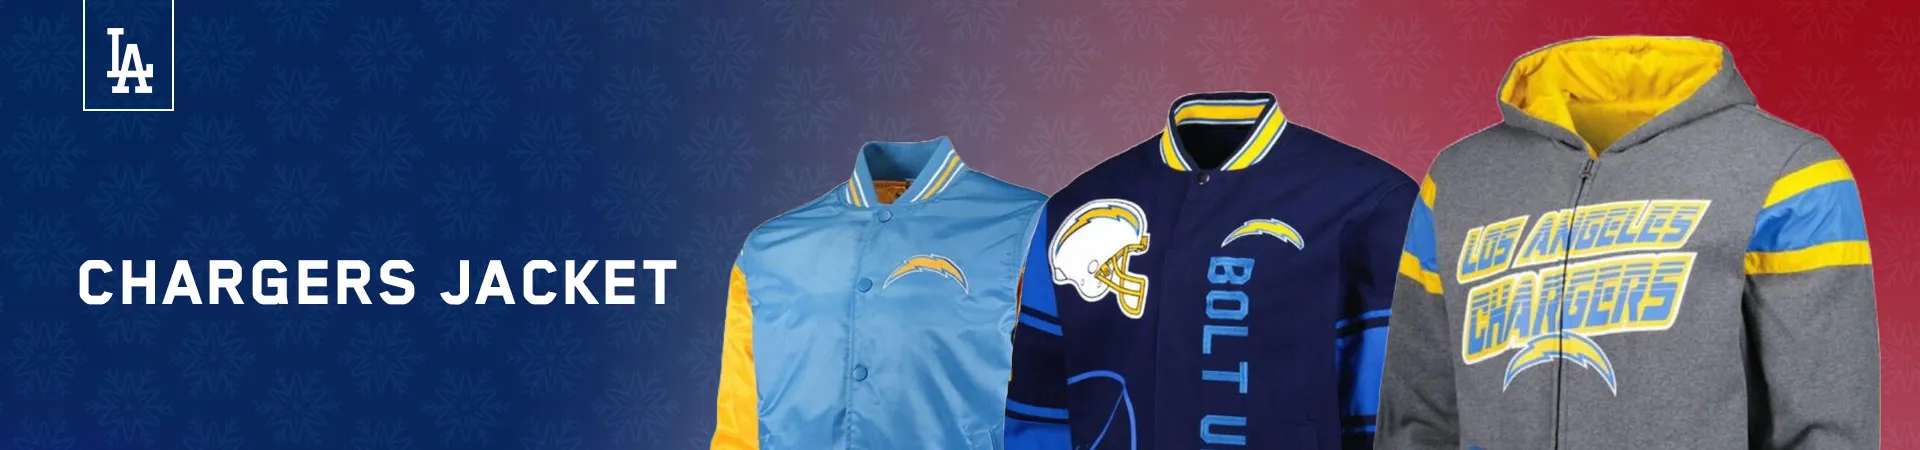 Chargers Jacket Banner